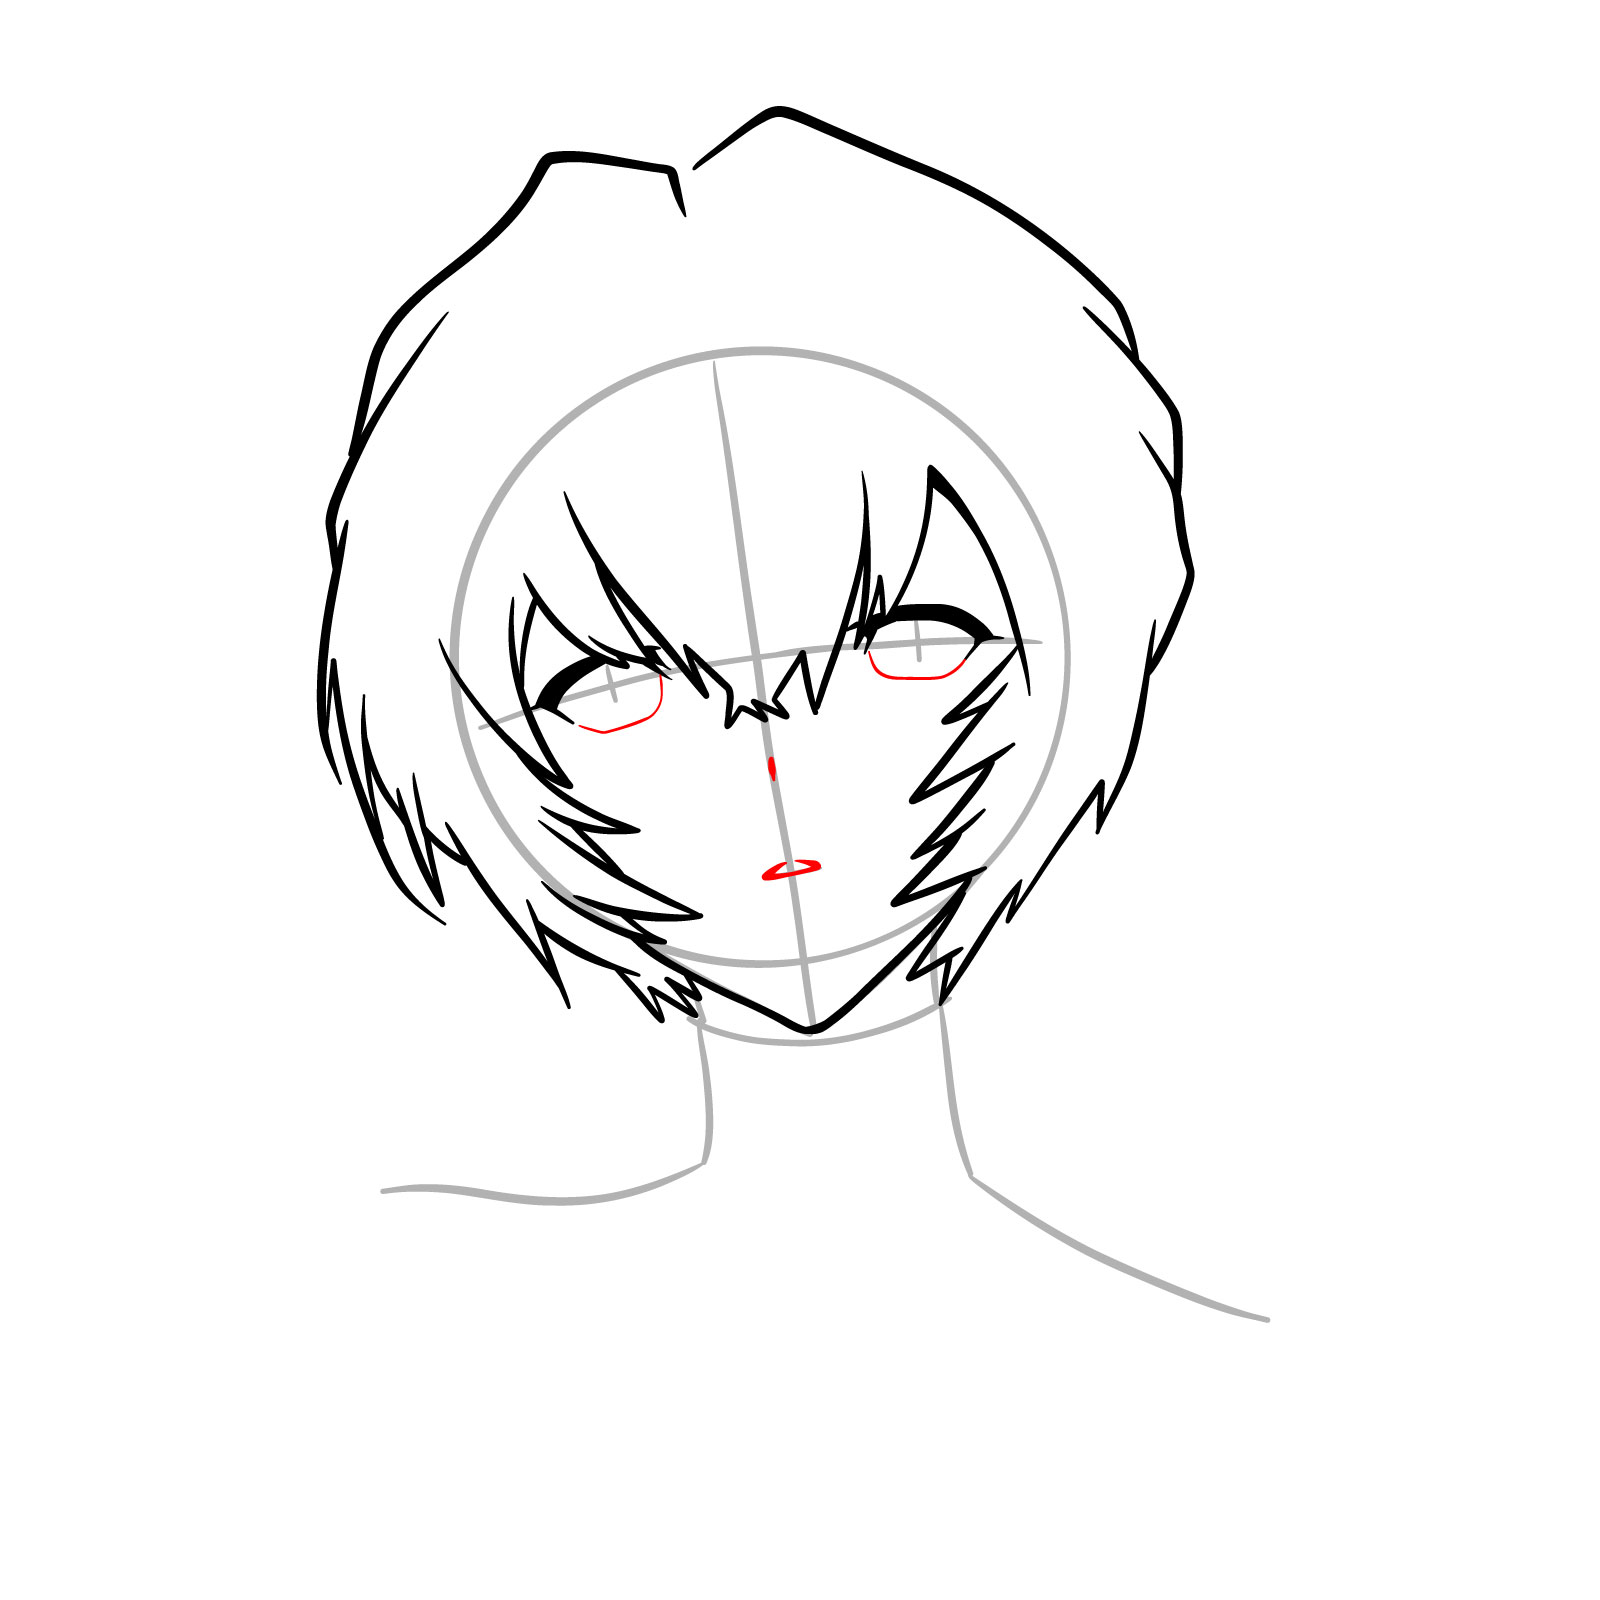 How to draw Rei Ayanami's face - Evangelion - step 10